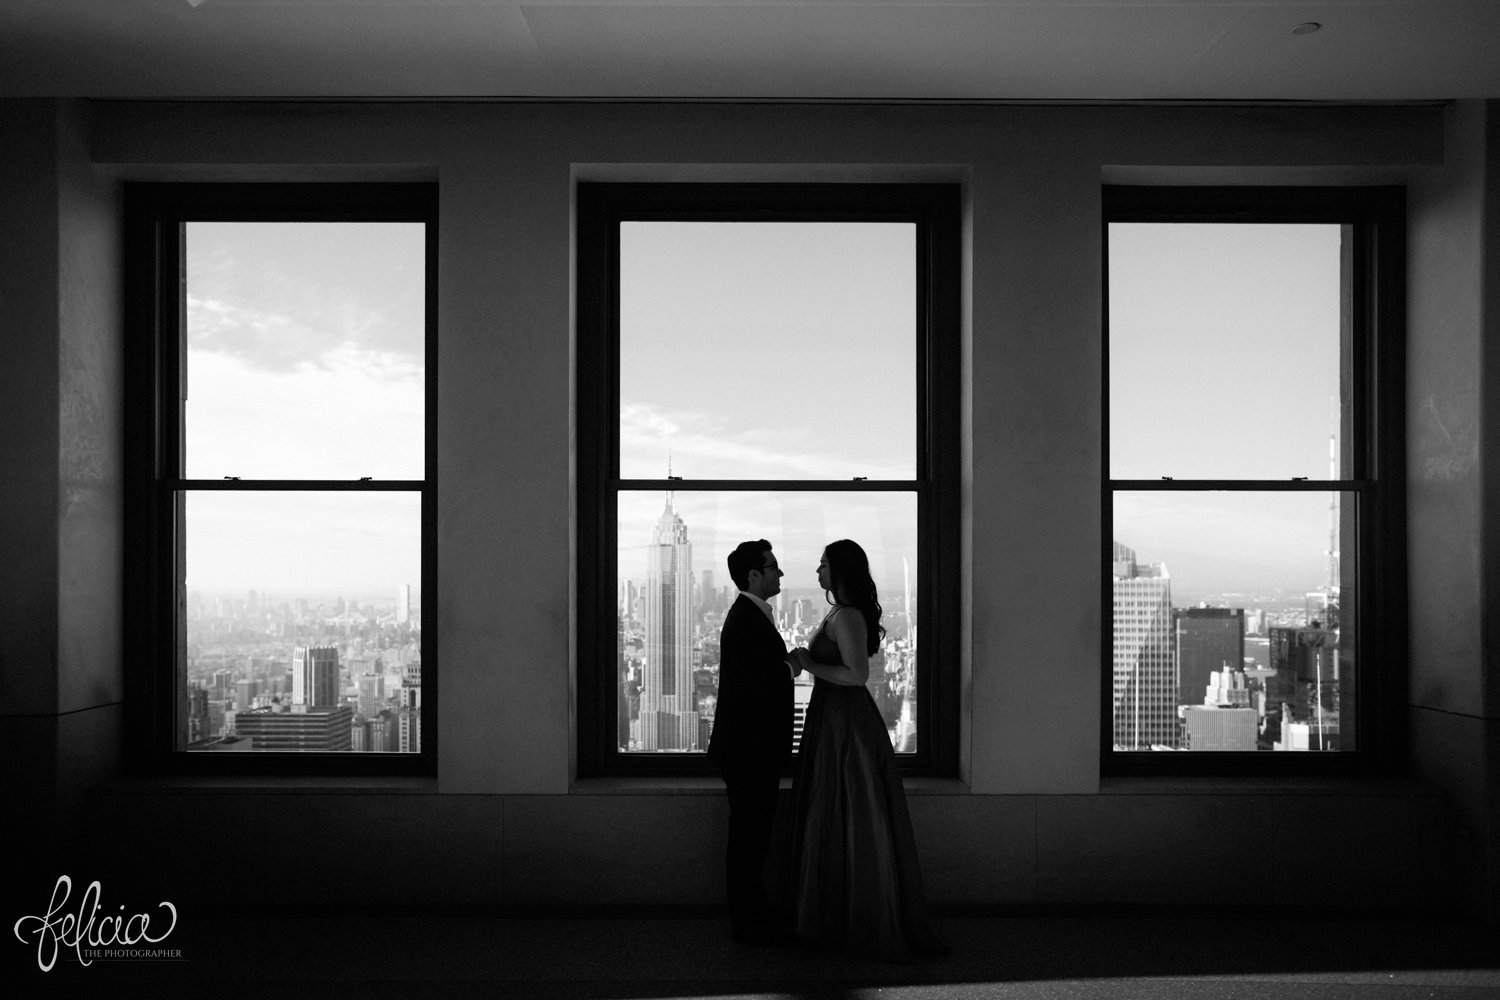 images by feliciathephotographer.com | destination wedding photographer | engagement | new york city | skyline | downtown | urban | formal | classic | elegant | long red gown | suit and tie | top of the rock | sunrise | elegant | glam | black and white | 